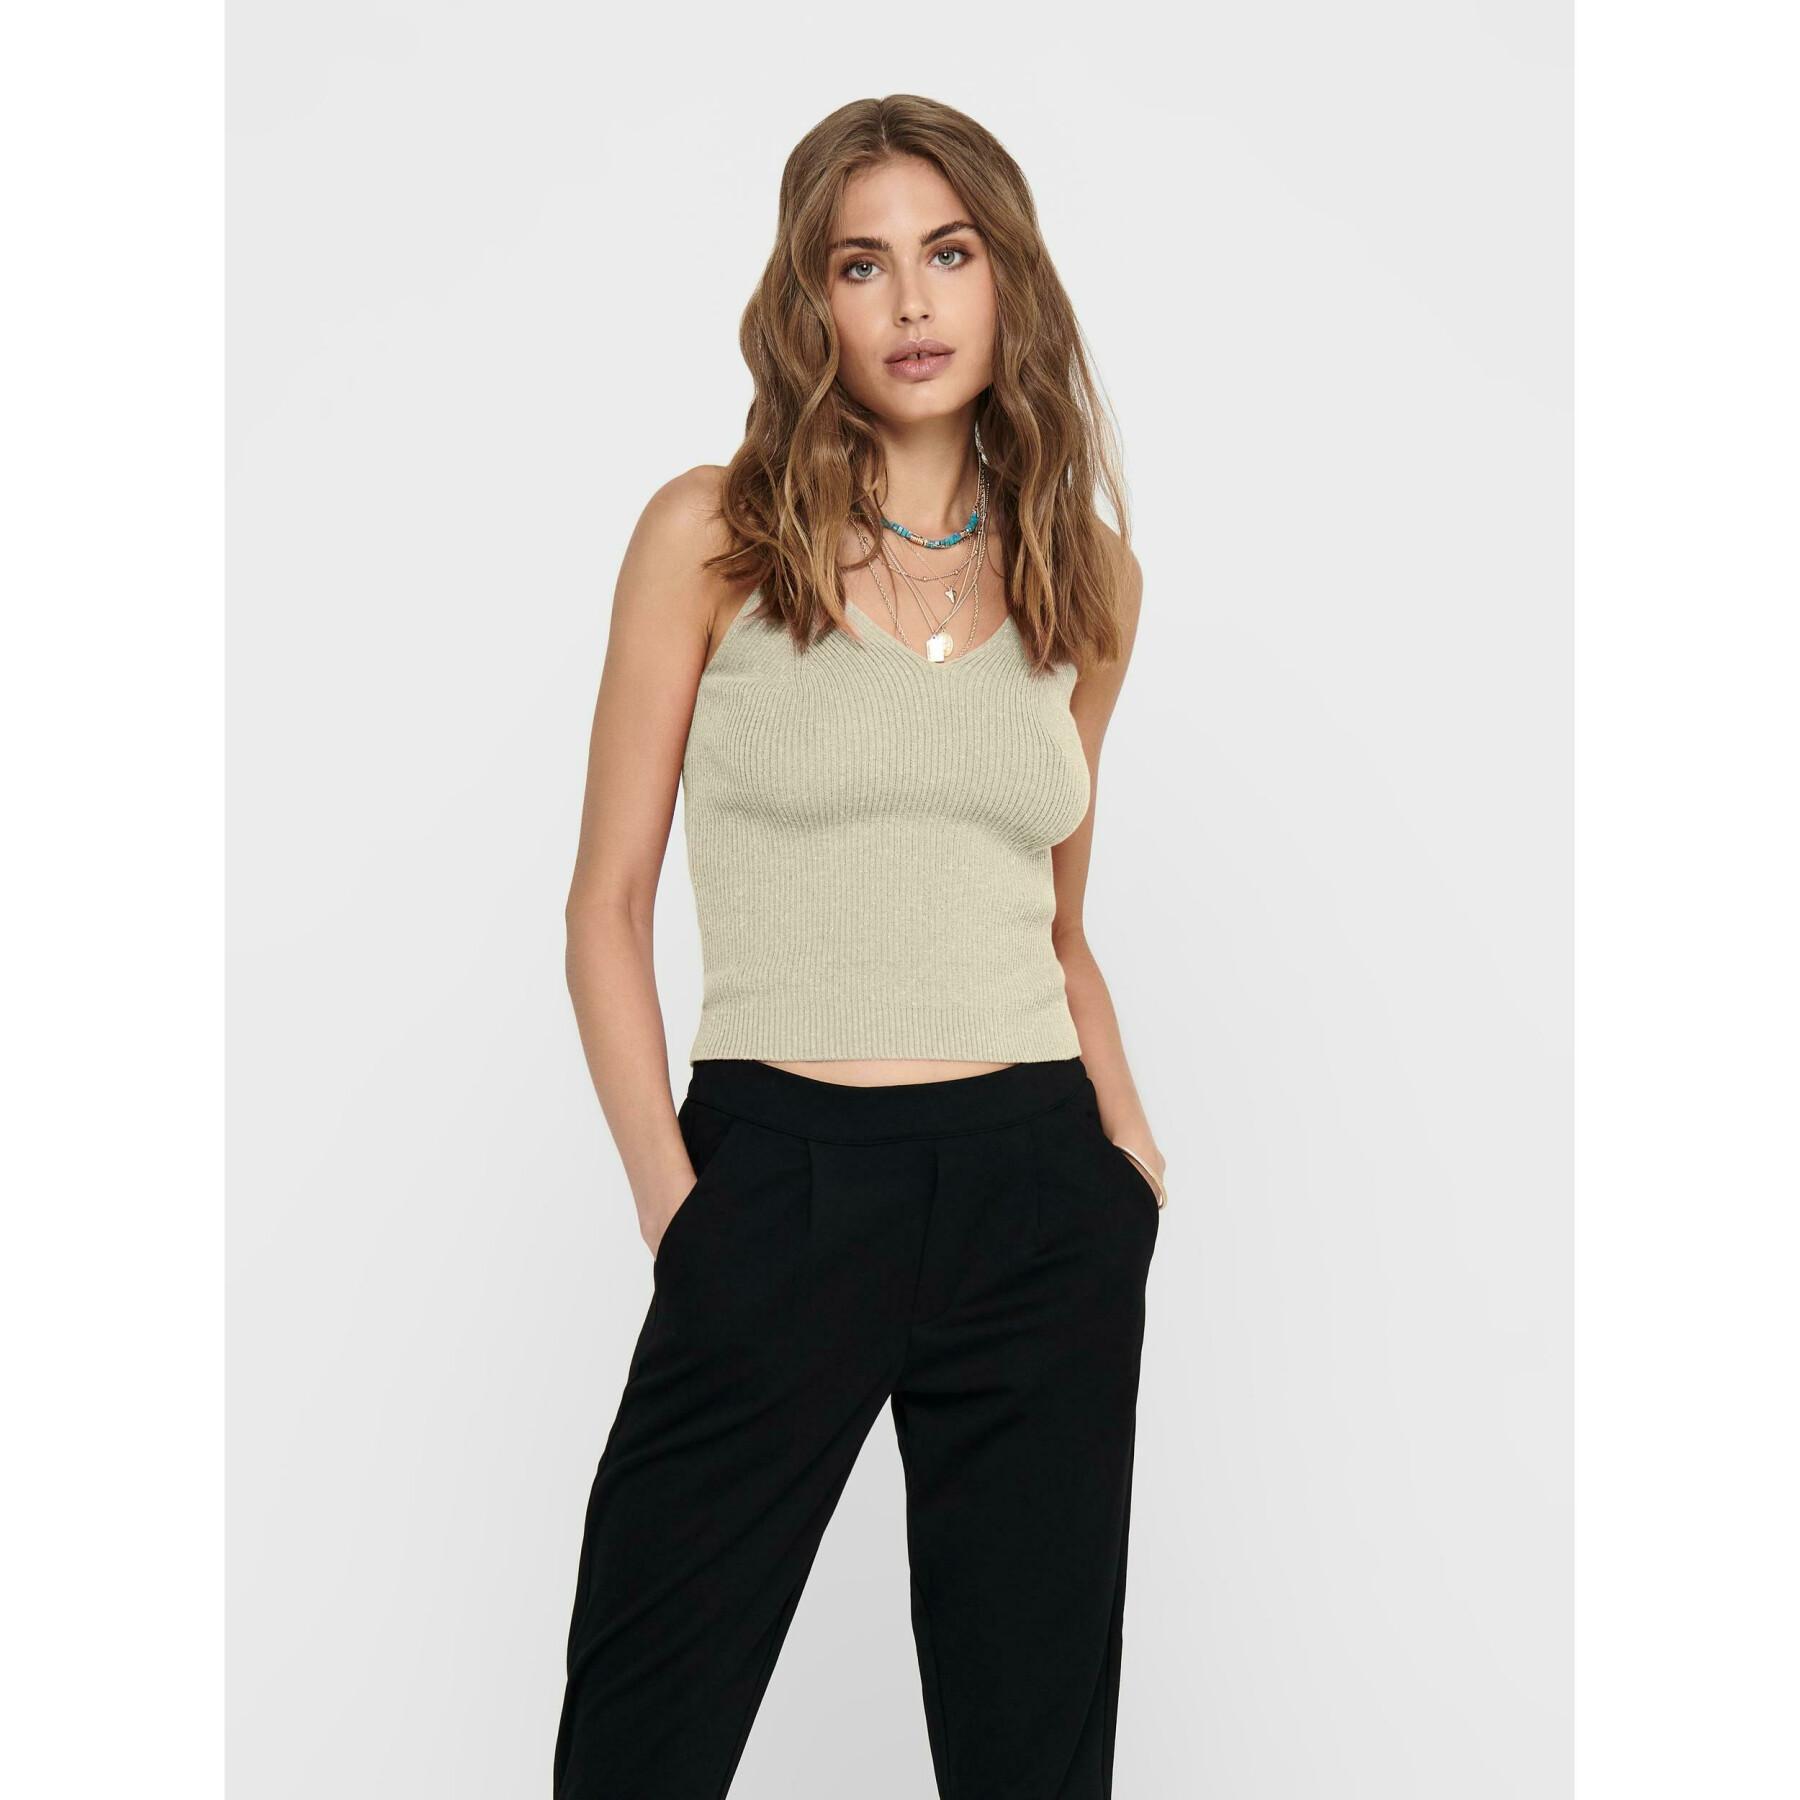 Women's top Only Lina